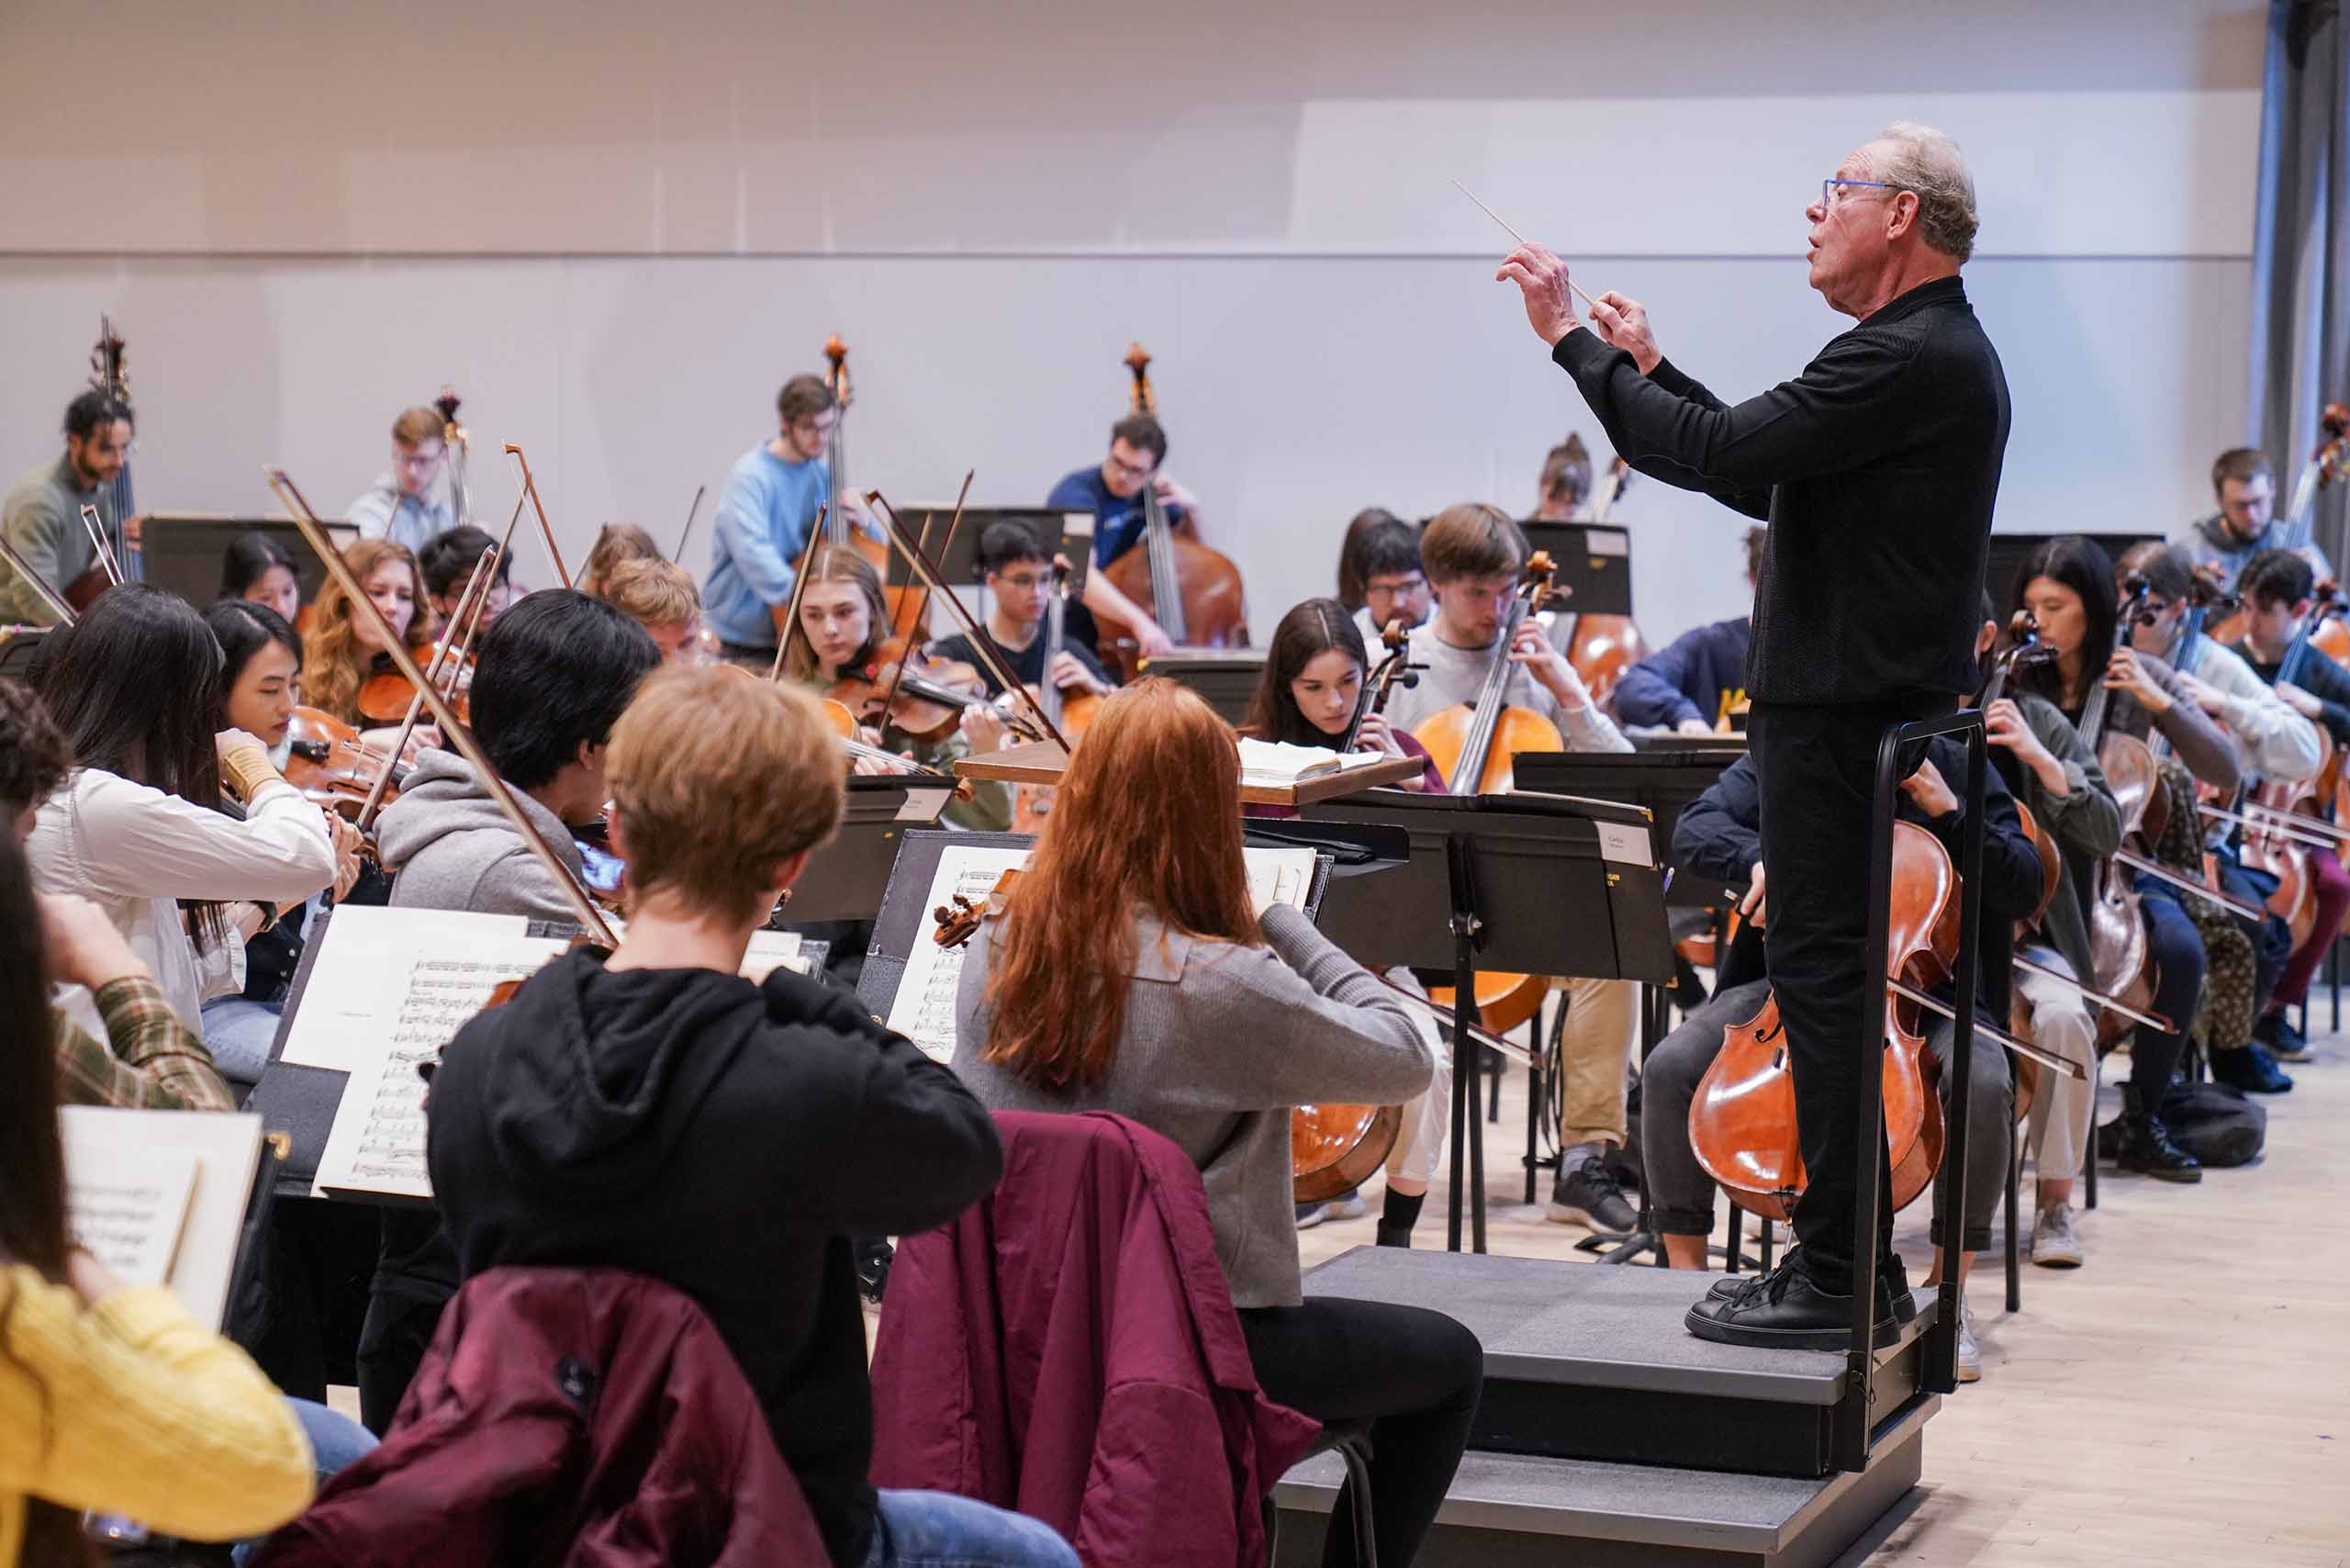 A conductor wearing all black leads an orchestra playing in a classroom